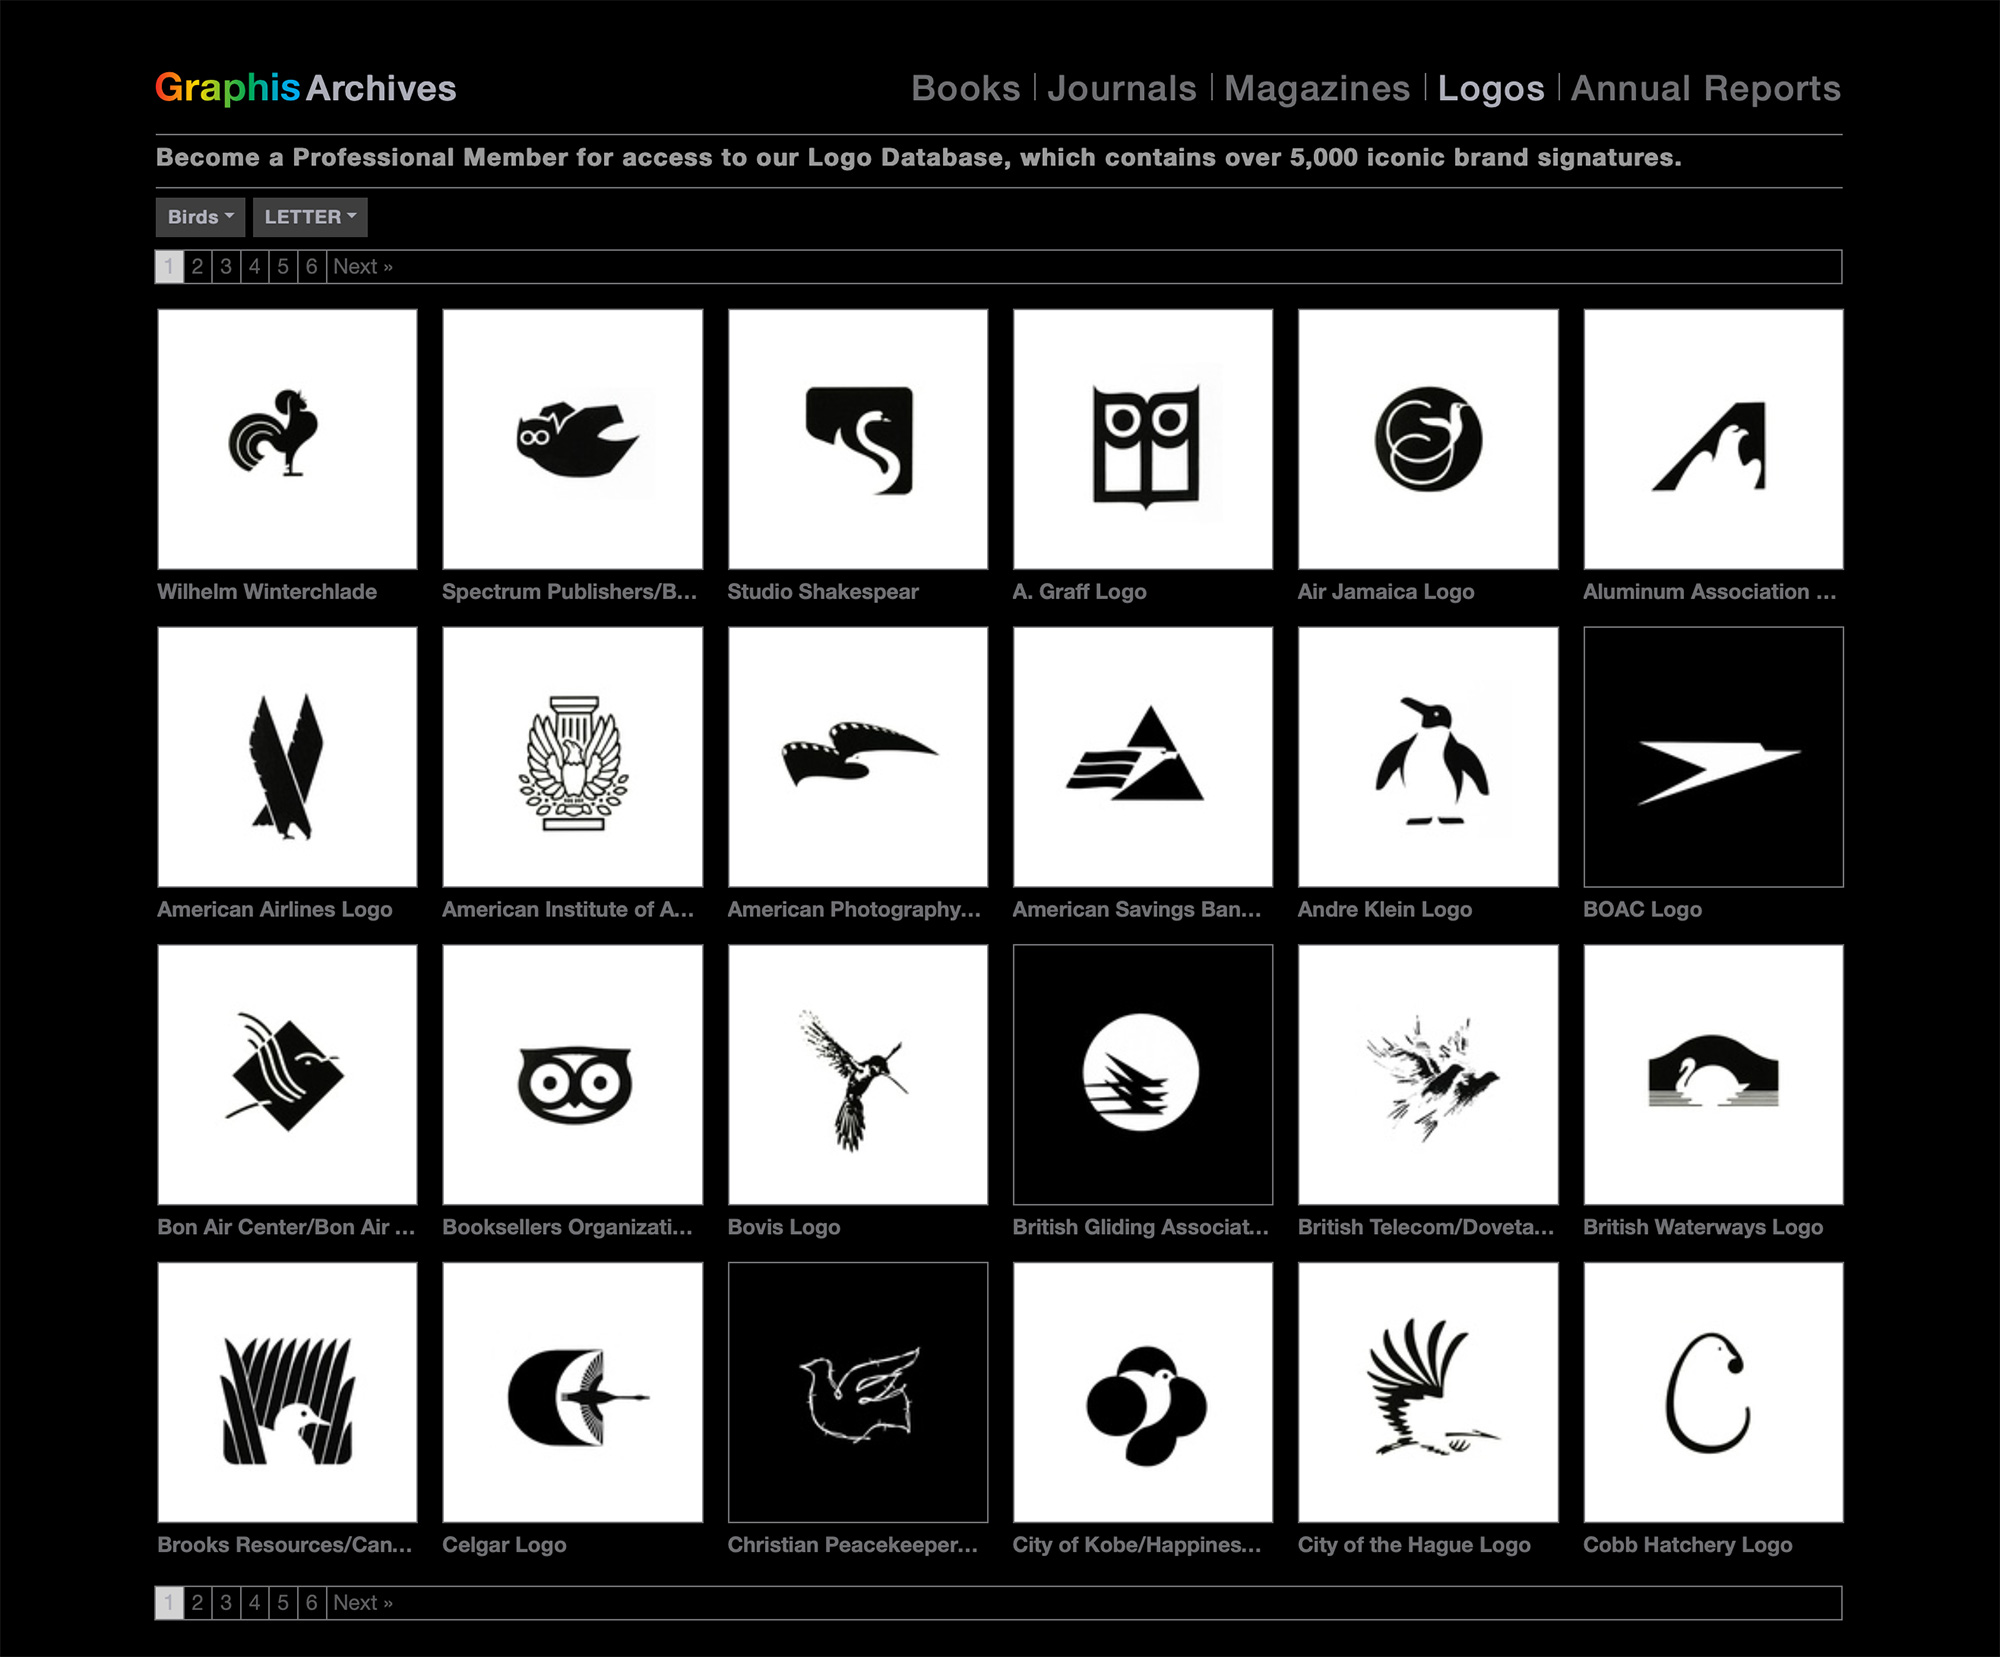 Graphis logo archives